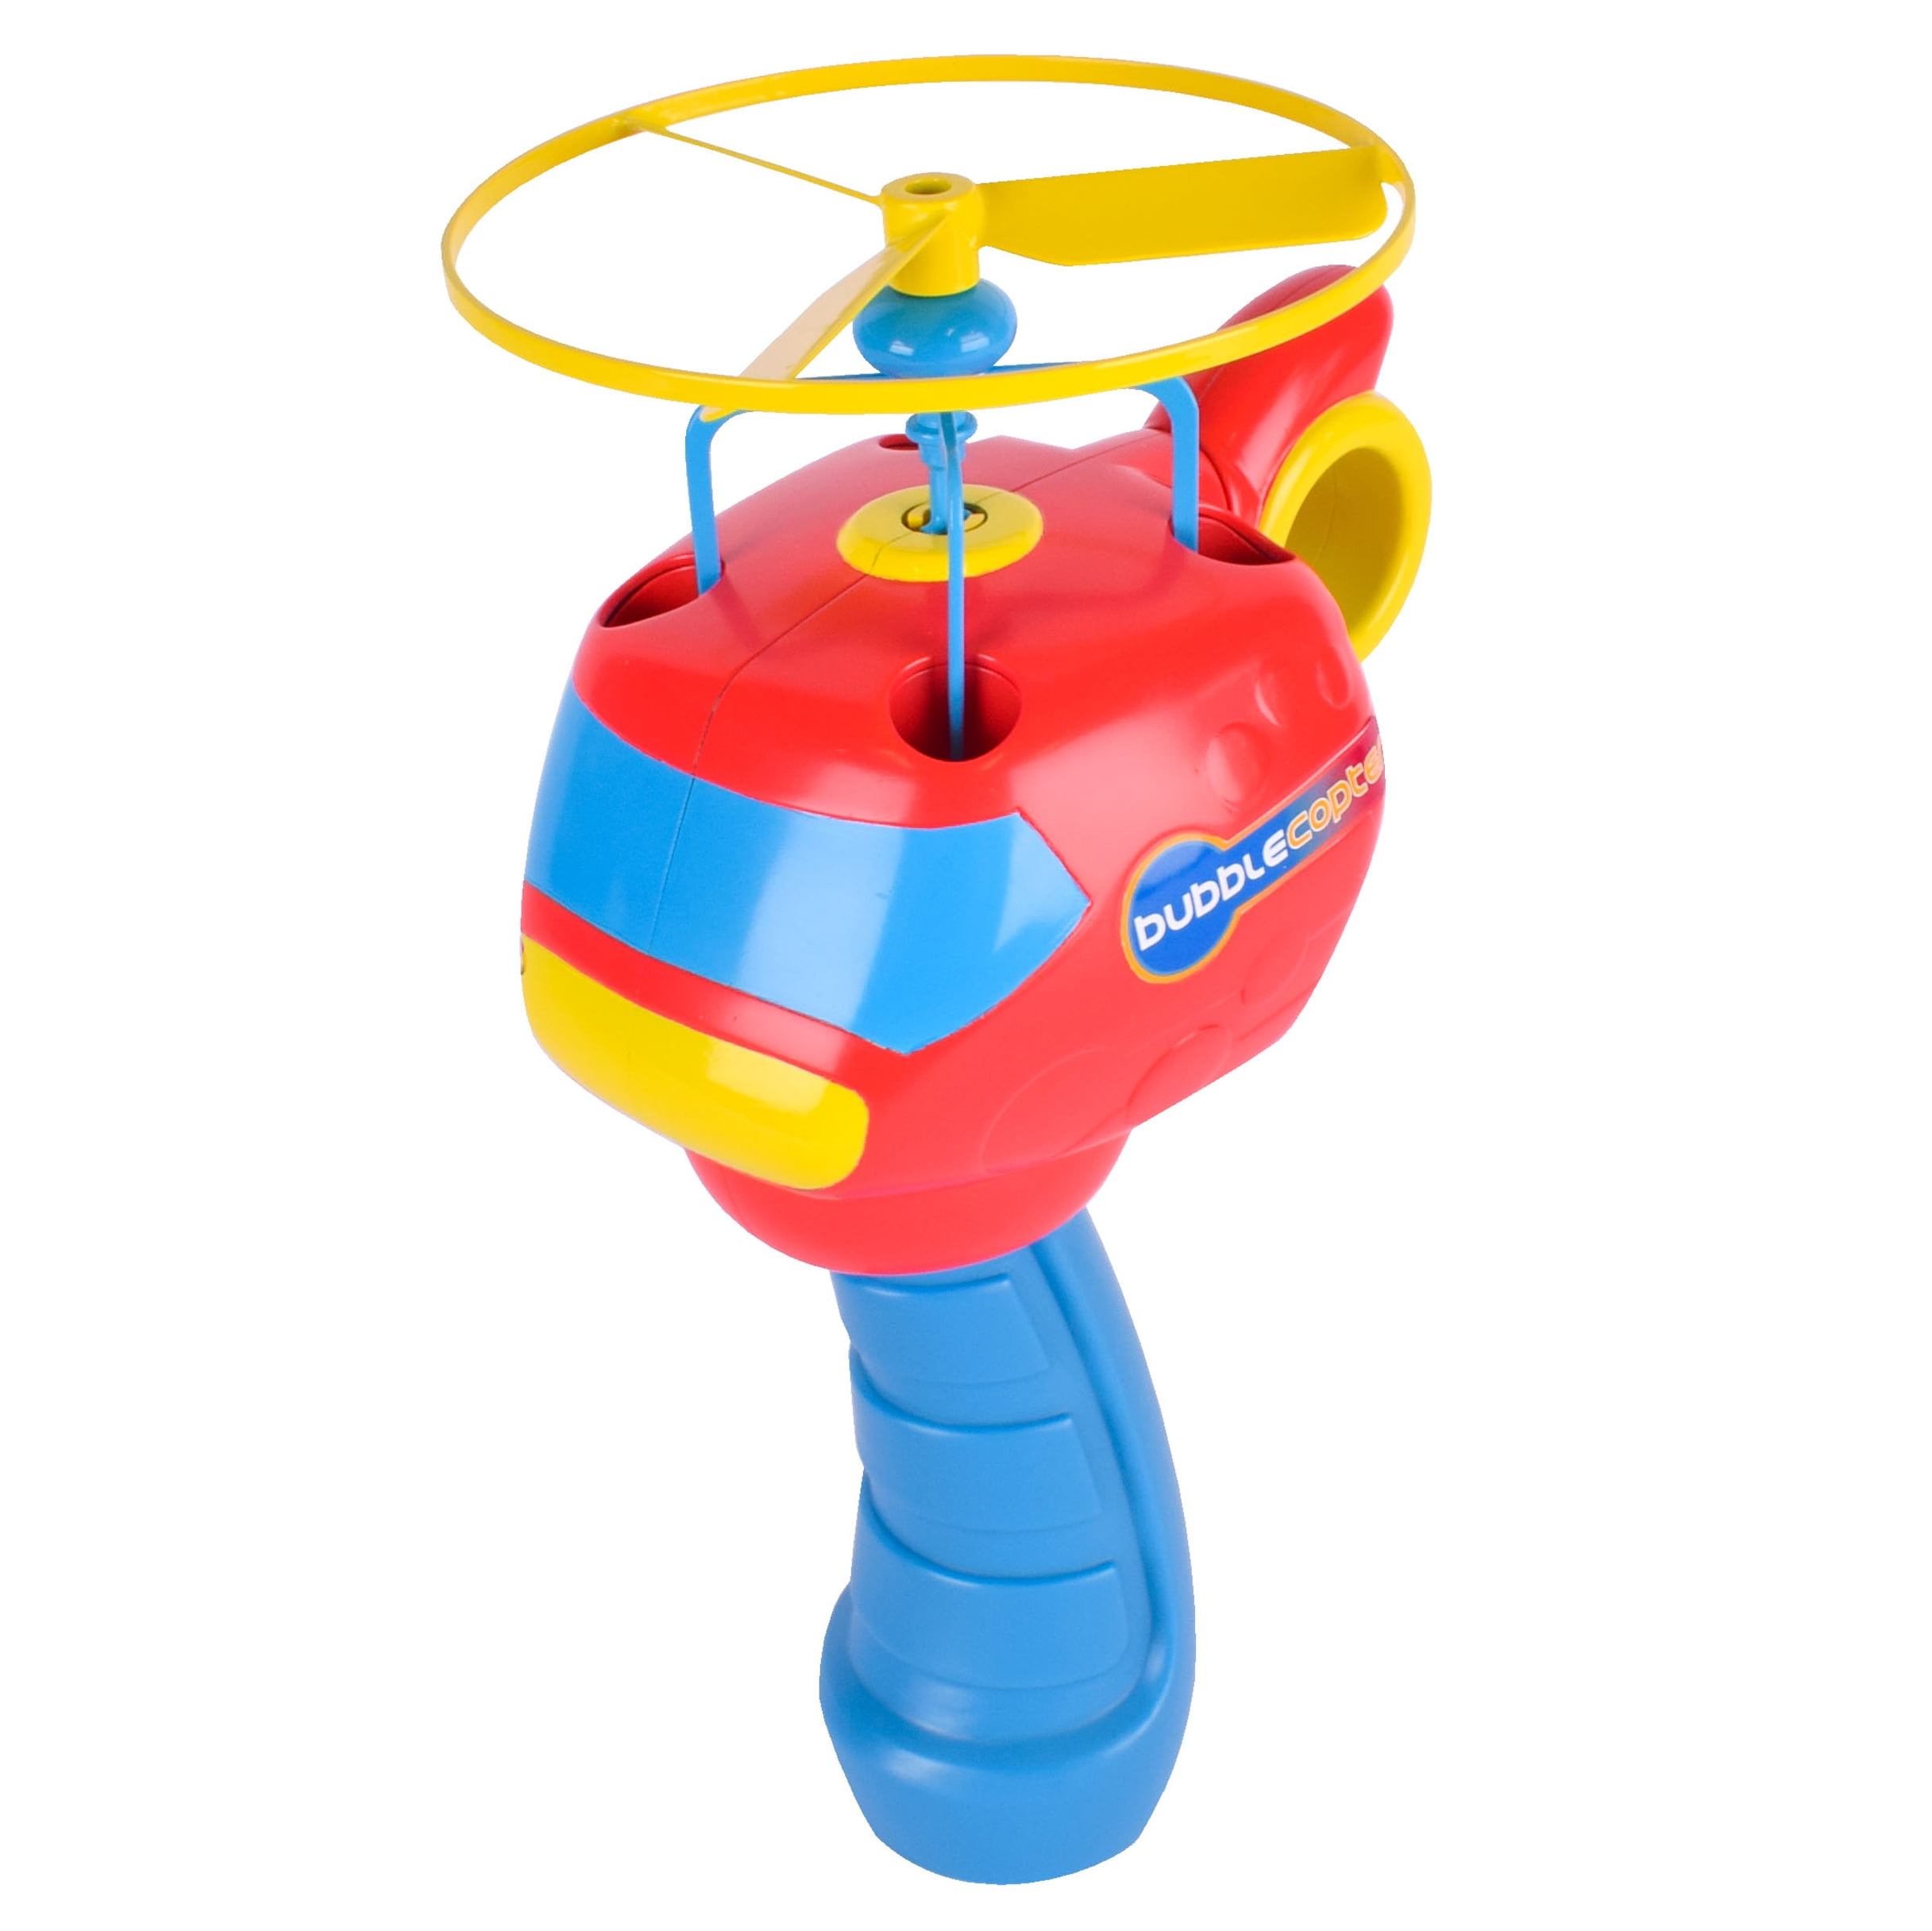 Discovery Kids Toy Bubble Blower Dipper with Balloon Pumper and 250  Balloons - Fun for Kids Ages 5-7 in the Kids Play Toys department at